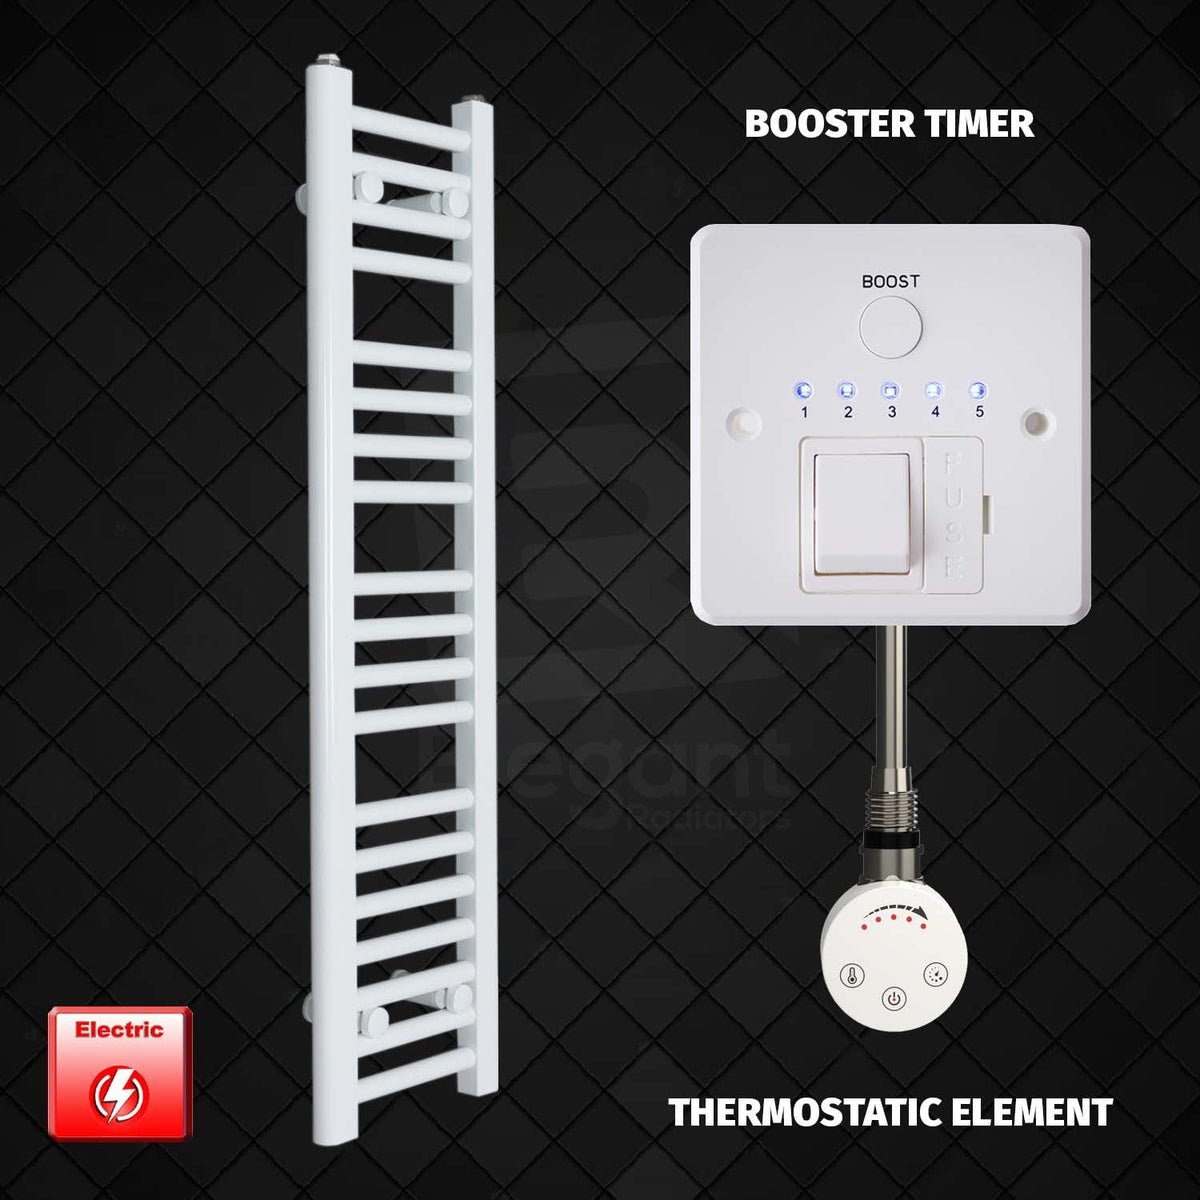 1000 mm High 200 mm Wide Pre-Filled Electric Towel Rail White HTR Smart Thermostatic Element Booster Timer